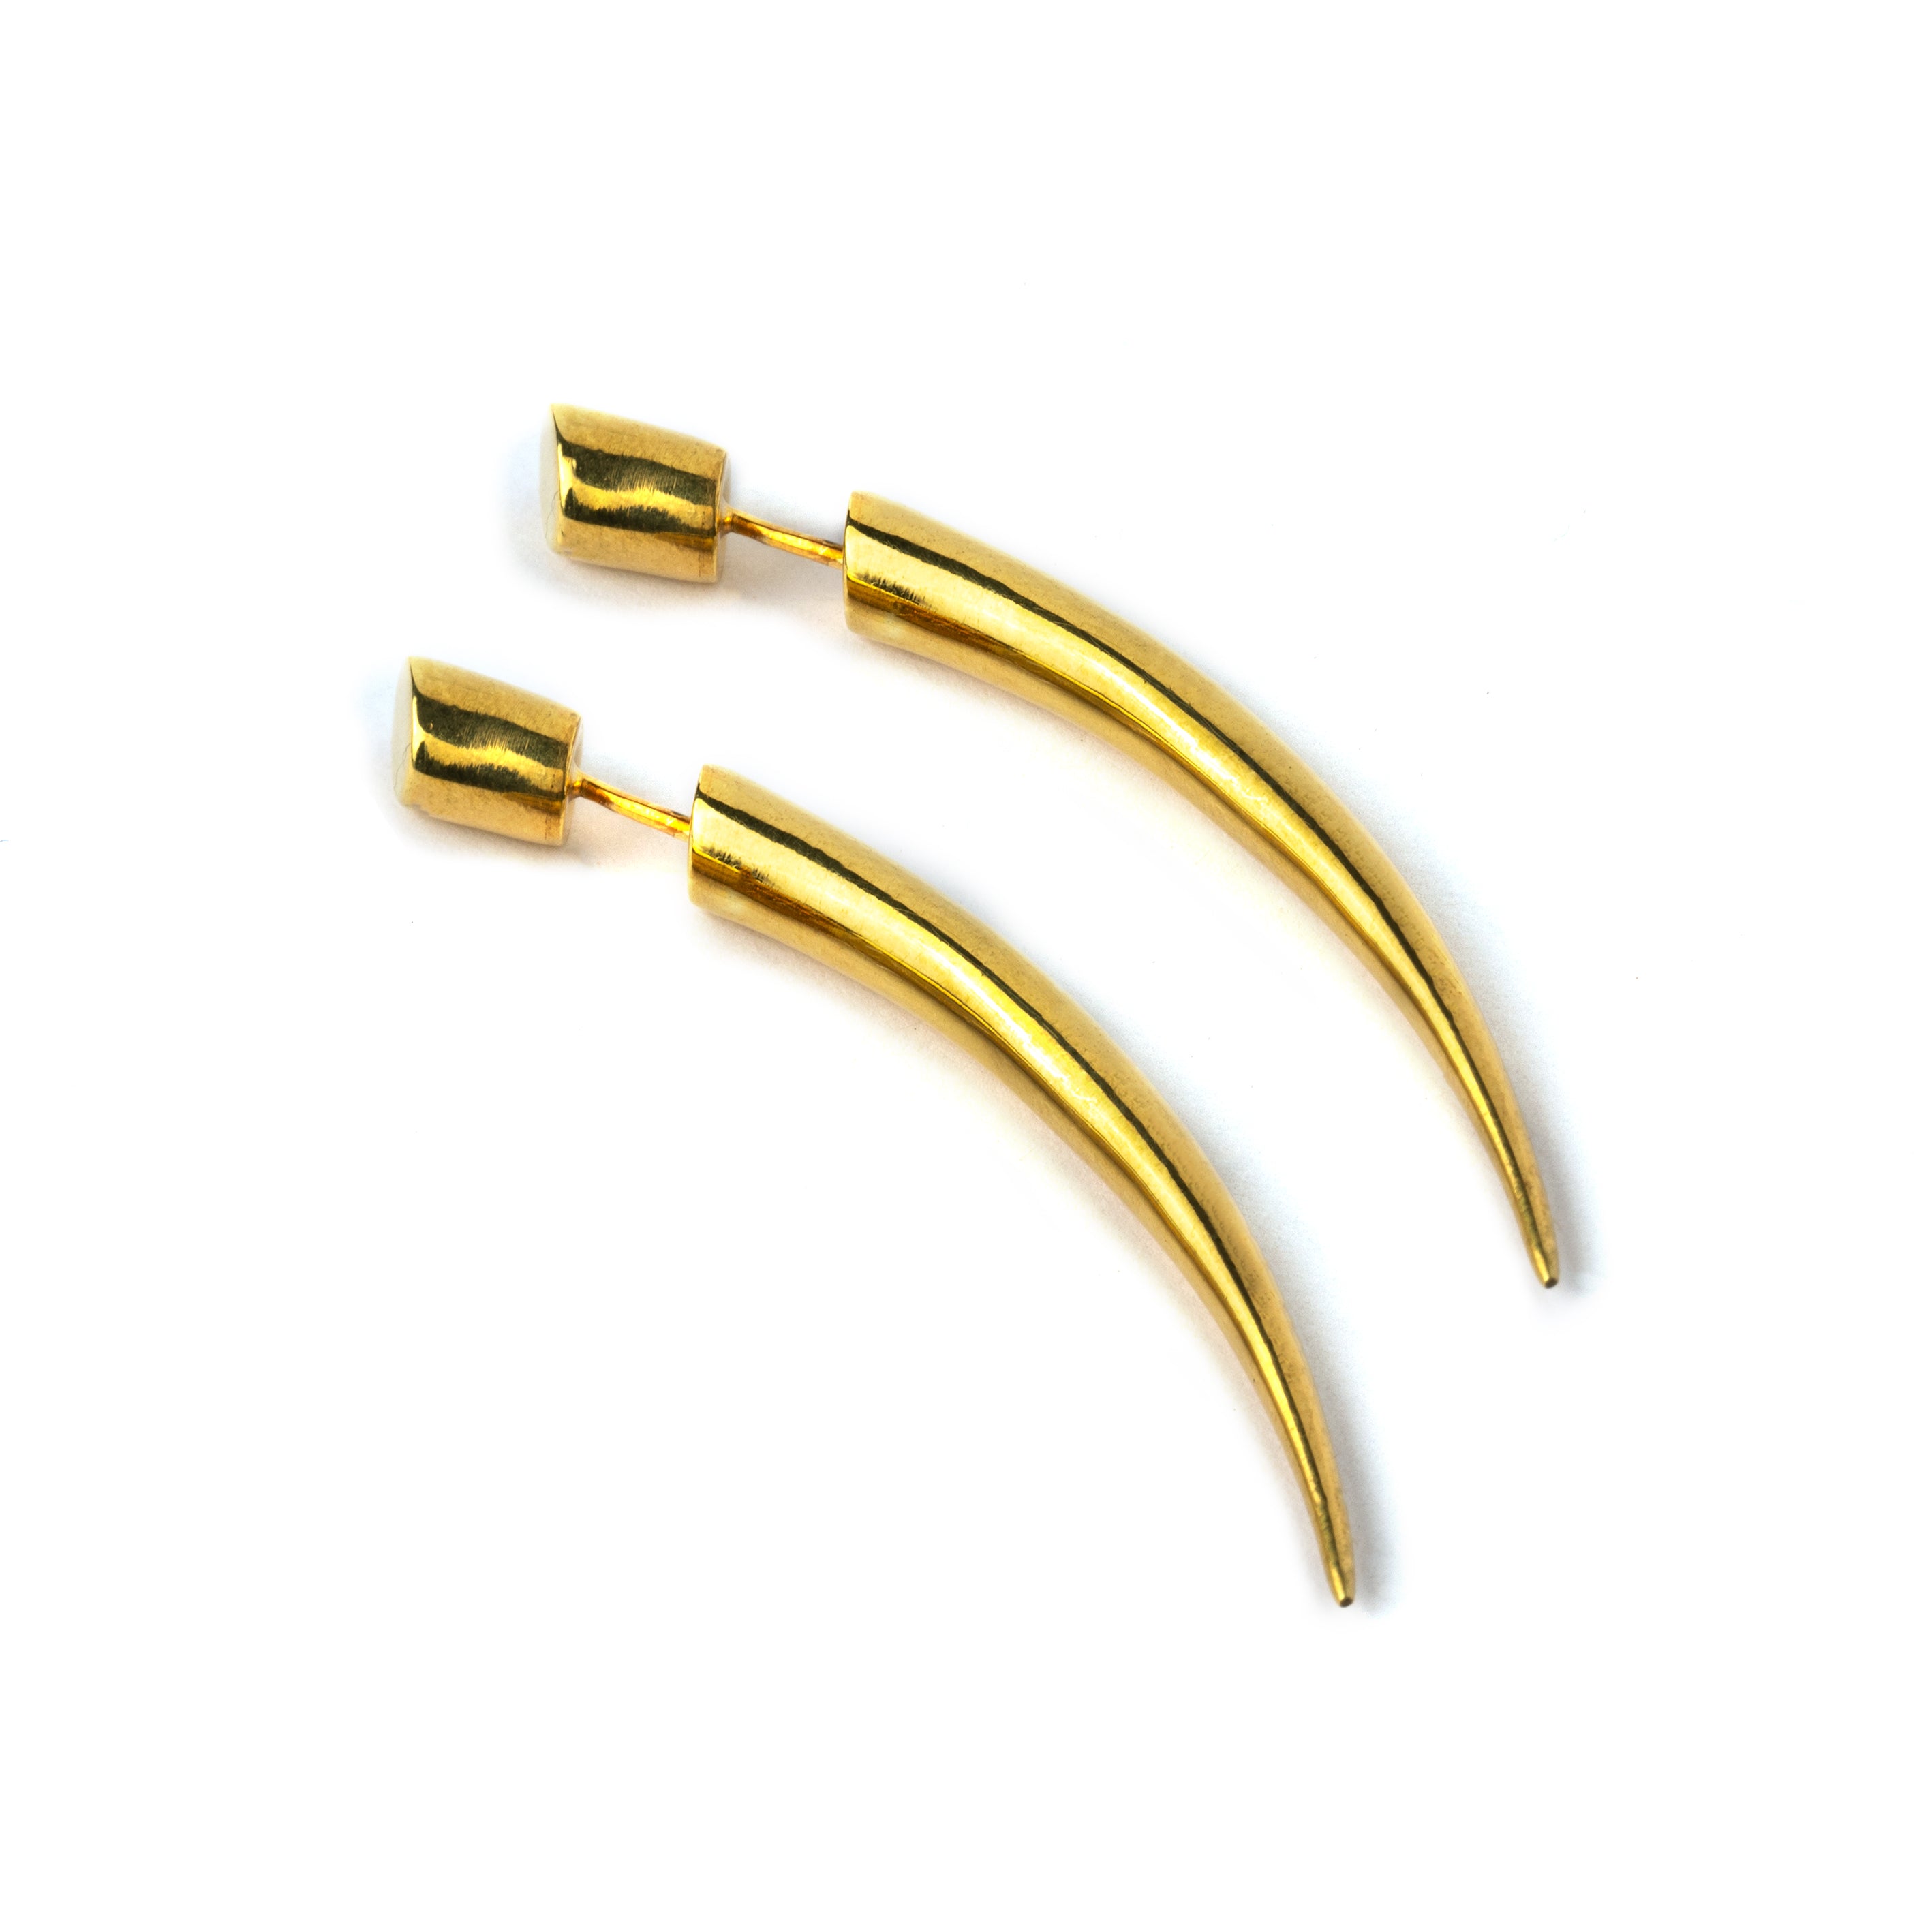 pair of 60mm gold plated silver curved spike fake gauge earring frontal view